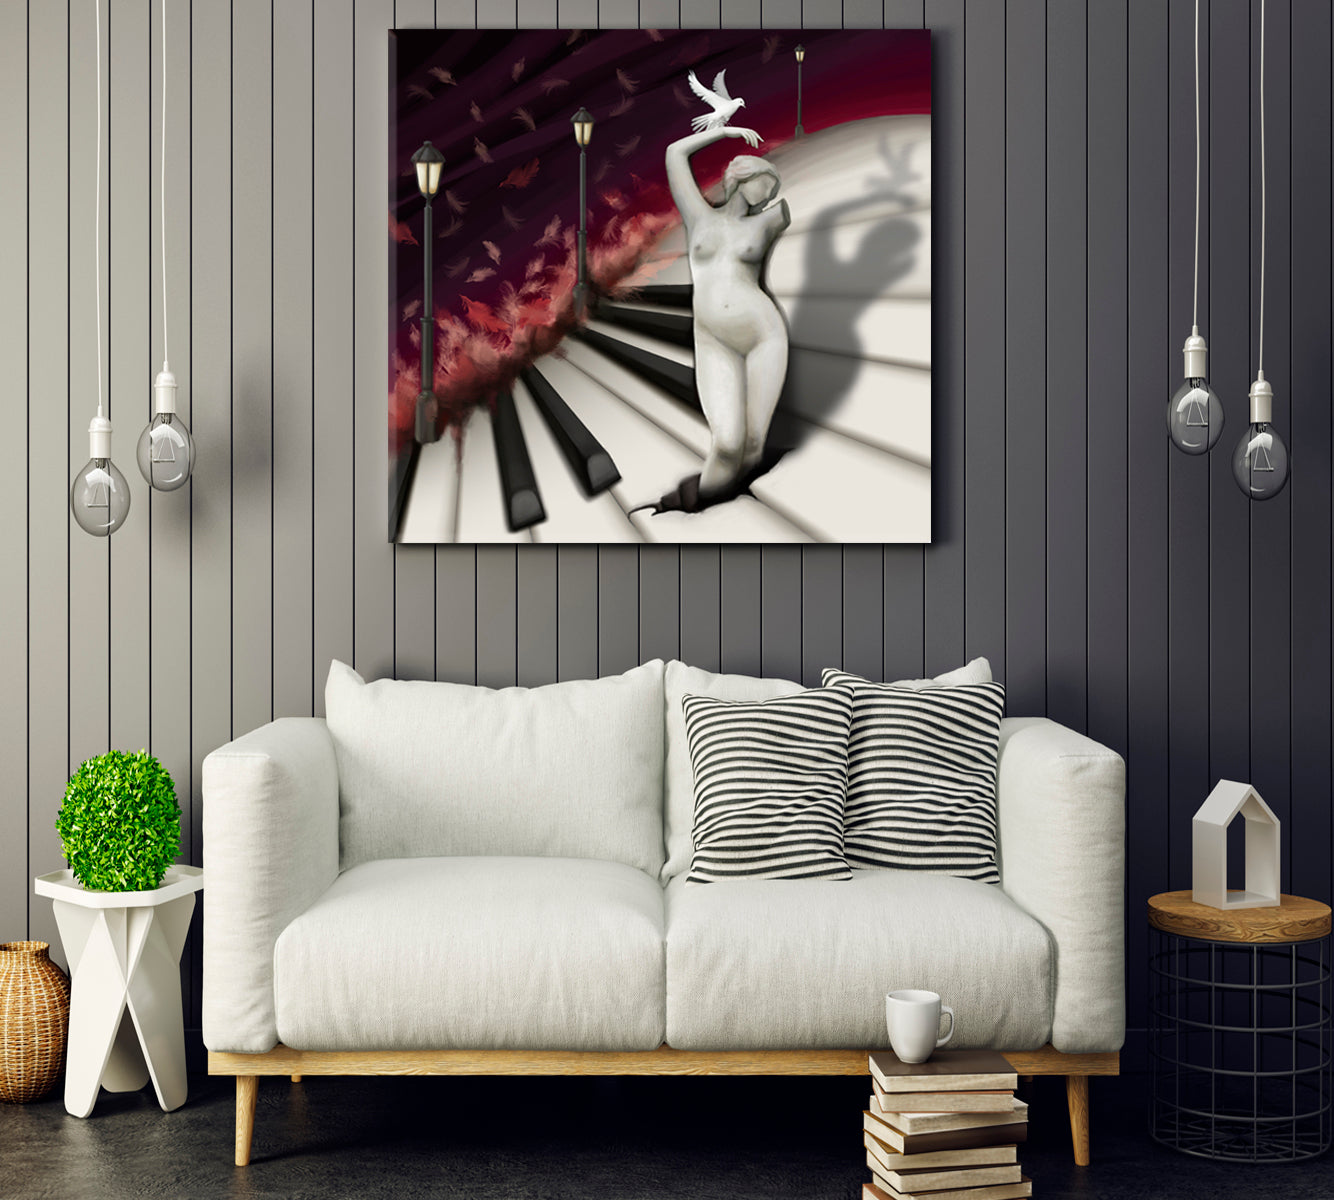 Woman Sculpture and Bird in Fantasy Piano World Abstract Artwork Music Wall Panels Artesty 1 Panel 12"x12" 